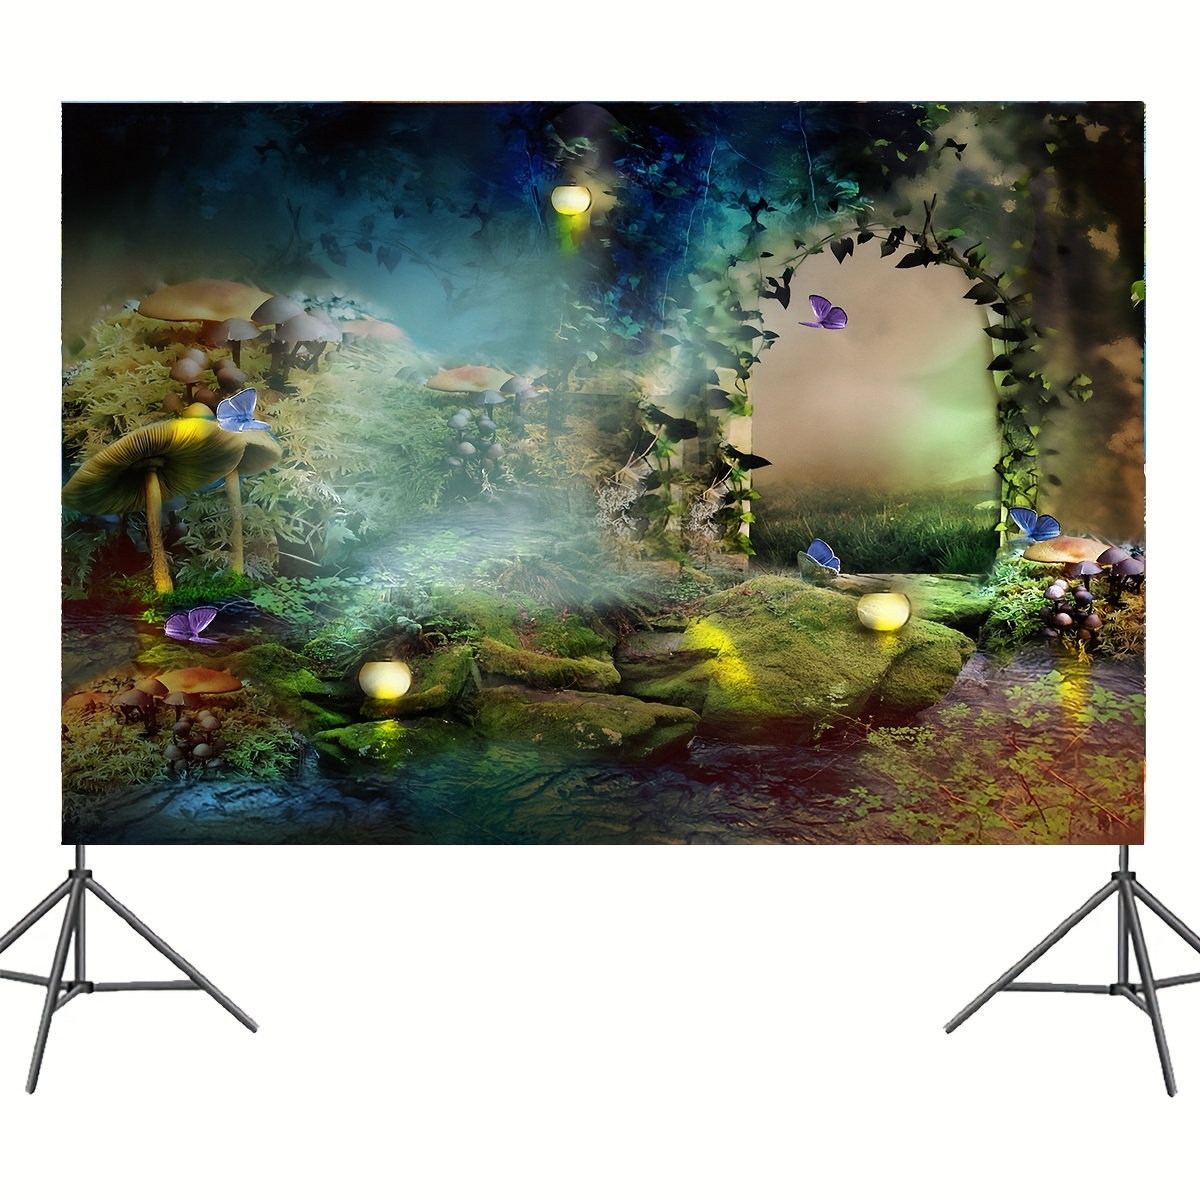 Enchanted Forest Birthday Backdrop, 1 Pcs Polyester Photography Background for Children's Boy Birthday Party Decorations, Universal Holiday Theme Without Electricity - Green Forest Secret Wonderland Banner